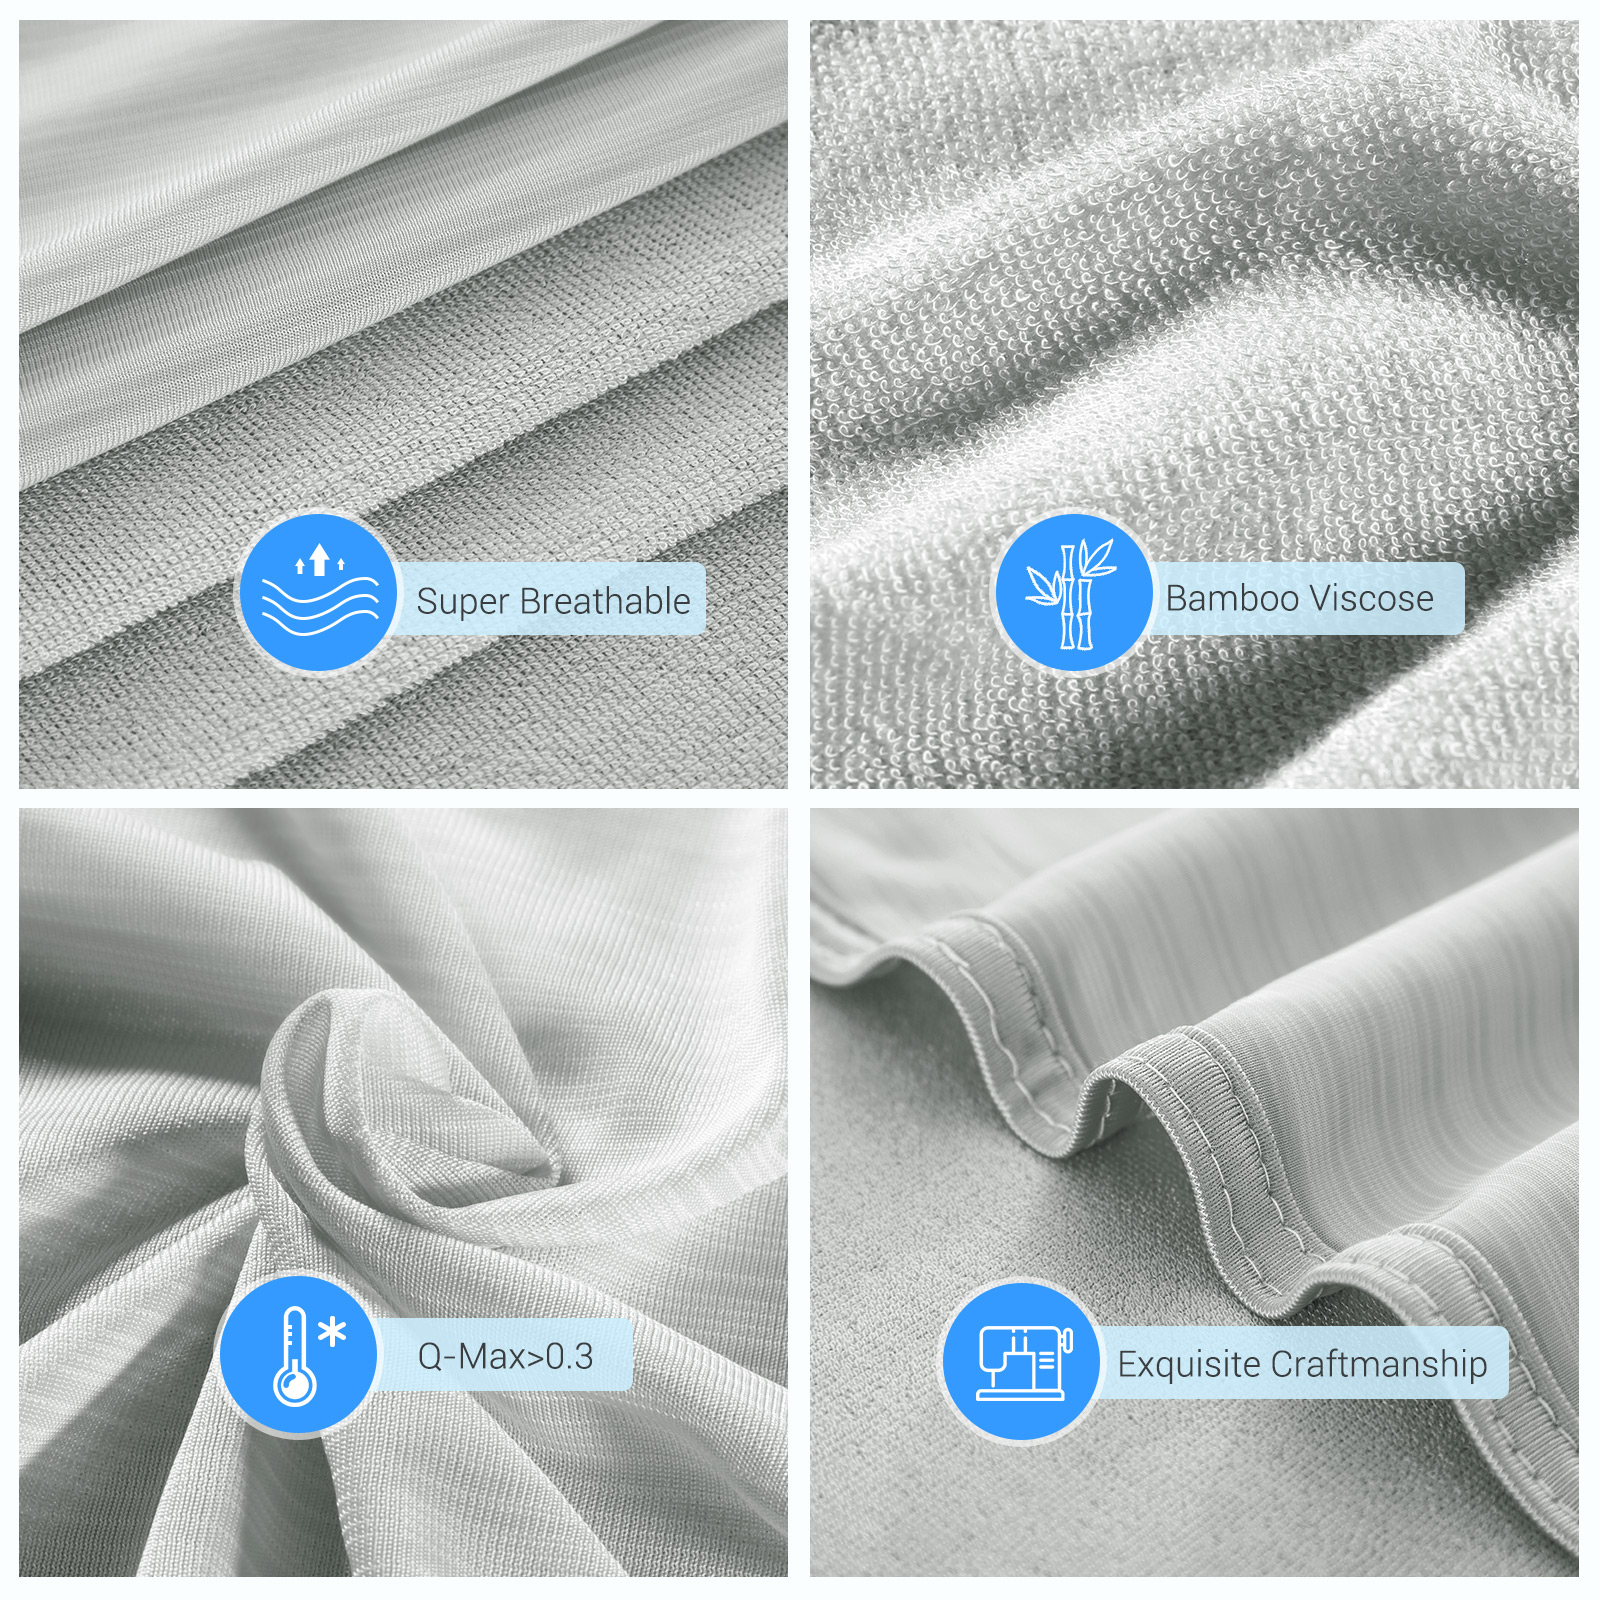 7 Reasons to Buy Avolare Arc-Chill Cooling Bedding for Your Comfort